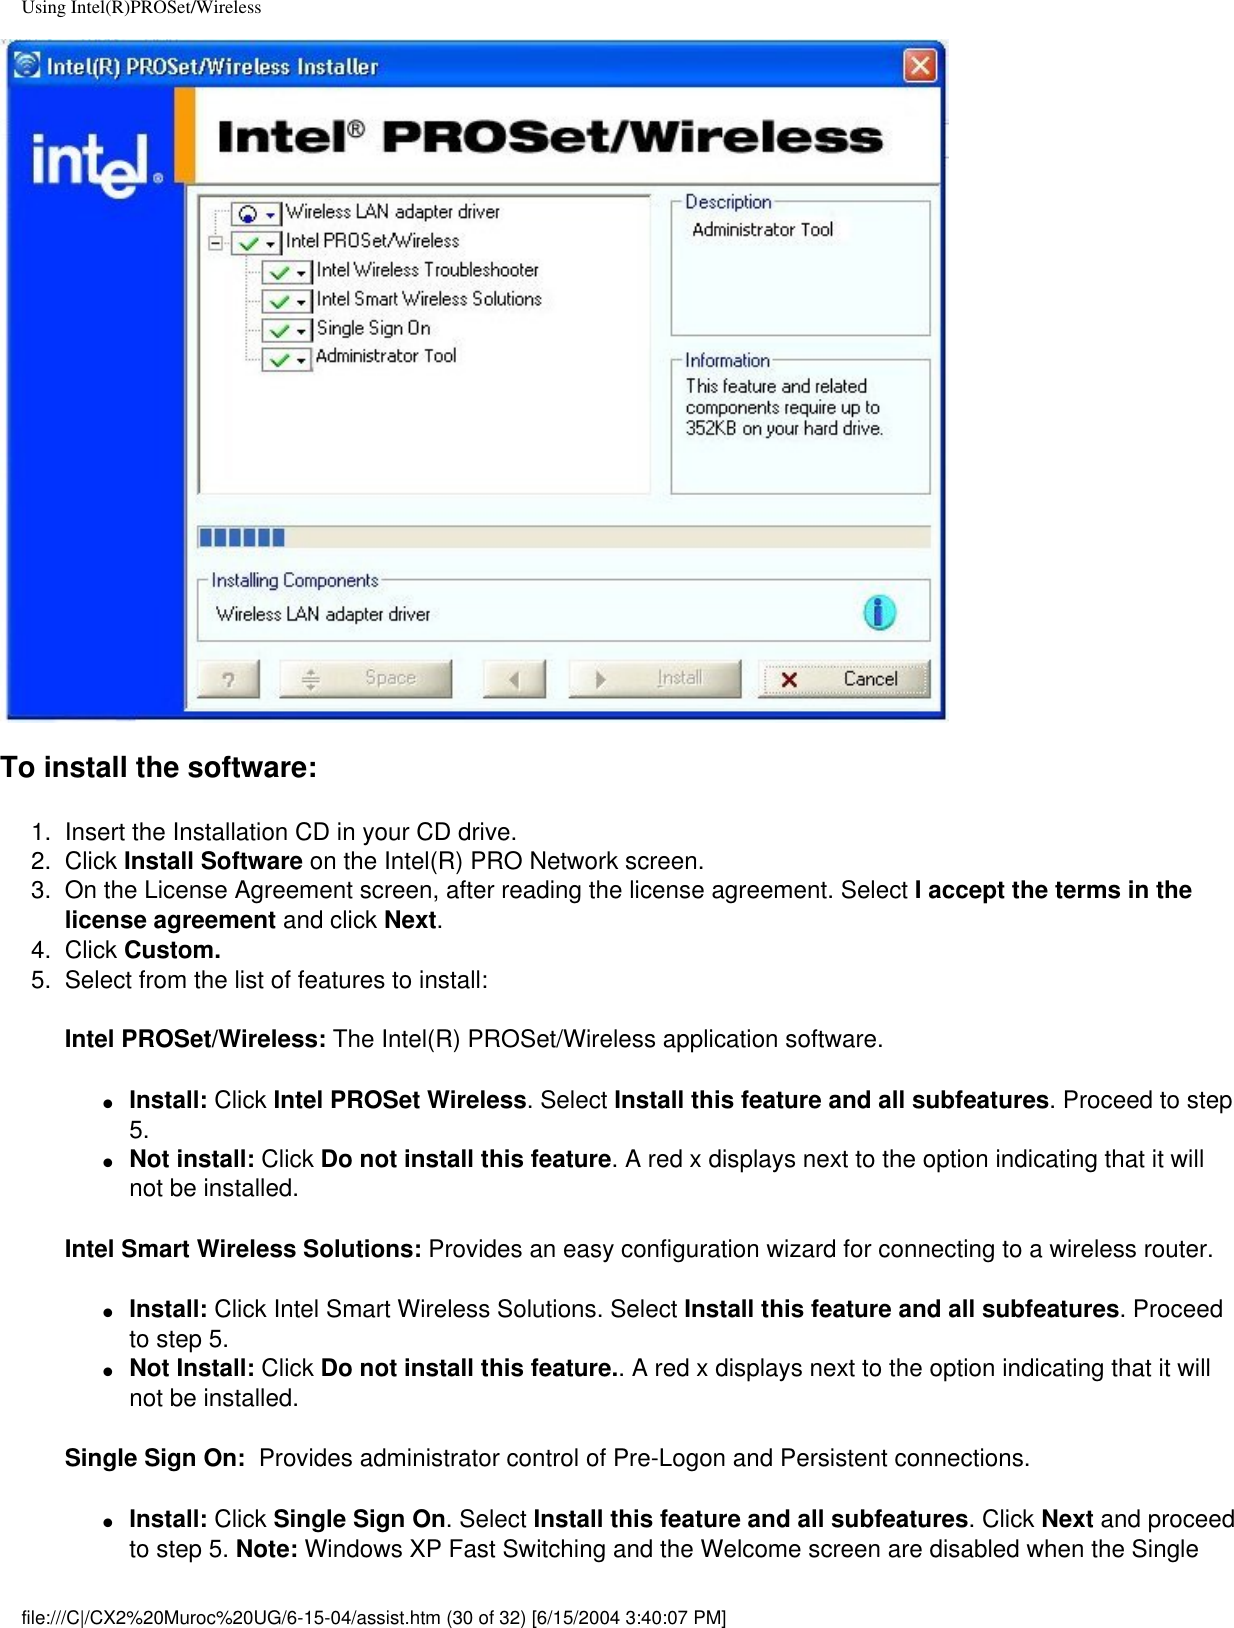 Using Intel(R)PROSet/WirelessTo install the software:1.  Insert the Installation CD in your CD drive. 2.  Click Install Software on the Intel(R) PRO Network screen.3.  On the License Agreement screen, after reading the license agreement. Select I accept the terms in the license agreement and click Next. 4.  Click Custom.5.  Select from the list of features to install:Intel PROSet/Wireless: The Intel(R) PROSet/Wireless application software. ●     Install: Click Intel PROSet Wireless. Select Install this feature and all subfeatures. Proceed to step 5. ●     Not install: Click Do not install this feature. A red x displays next to the option indicating that it will not be installed. Intel Smart Wireless Solutions: Provides an easy configuration wizard for connecting to a wireless router.●     Install: Click Intel Smart Wireless Solutions. Select Install this feature and all subfeatures. Proceed to step 5. ●     Not Install: Click Do not install this feature.. A red x displays next to the option indicating that it will not be installed. Single Sign On:  Provides administrator control of Pre-Logon and Persistent connections.●     Install: Click Single Sign On. Select Install this feature and all subfeatures. Click Next and proceed to step 5. Note: Windows XP Fast Switching and the Welcome screen are disabled when the Single file:///C|/CX2%20Muroc%20UG/6-15-04/assist.htm (30 of 32) [6/15/2004 3:40:07 PM]